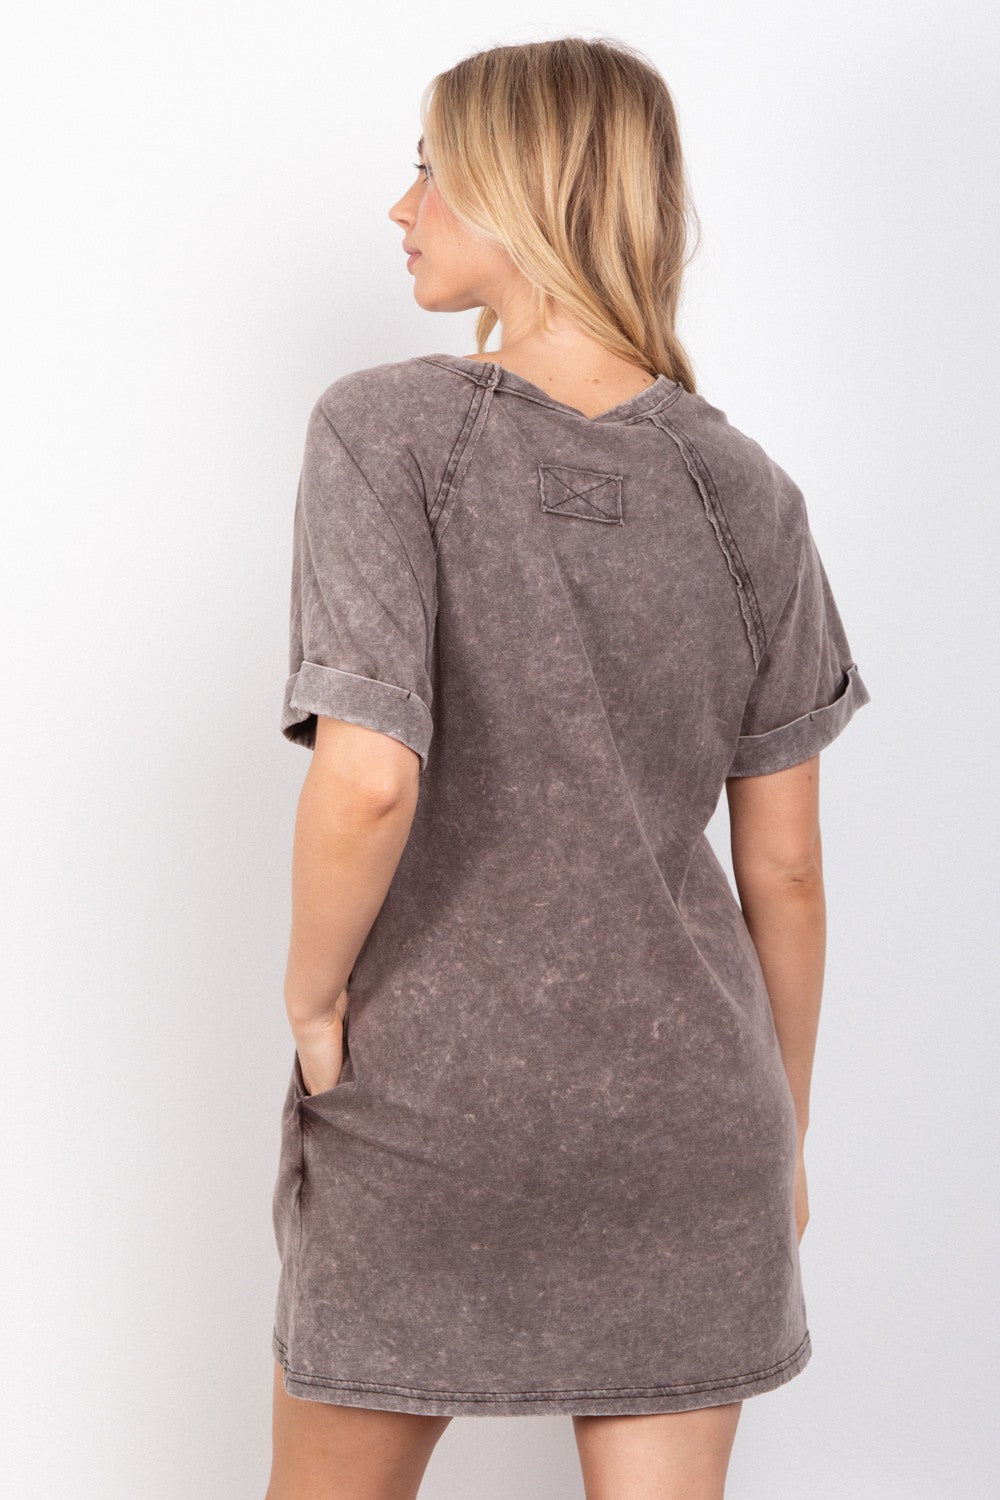 This Washed Round Neck Mini Tee Dress is a stylish and versatile piece for your casual wardrobe. The washed fabric gives it a soft and lived-in look, perfect for a laid-back vibe. With a classic round neck and mini length, this dress offers a simple yet flattering silhouette. S - L